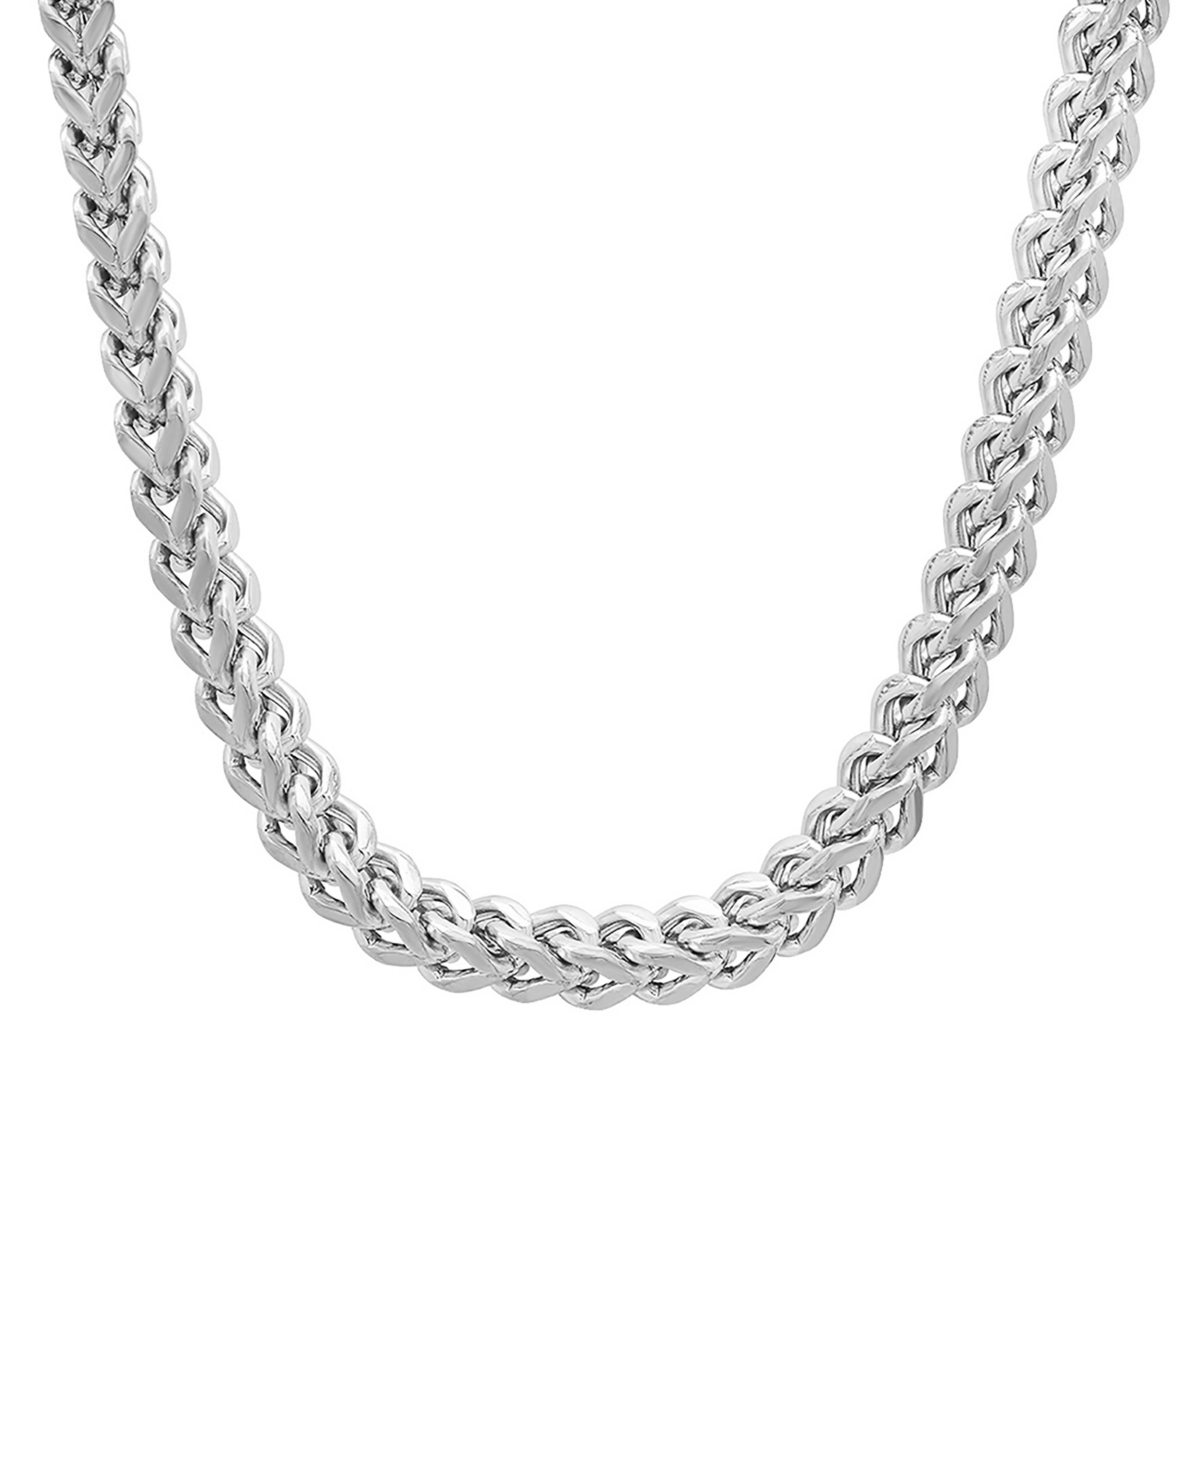 Men's Stainless Steel Wheat Chain Necklace - Silver-tone